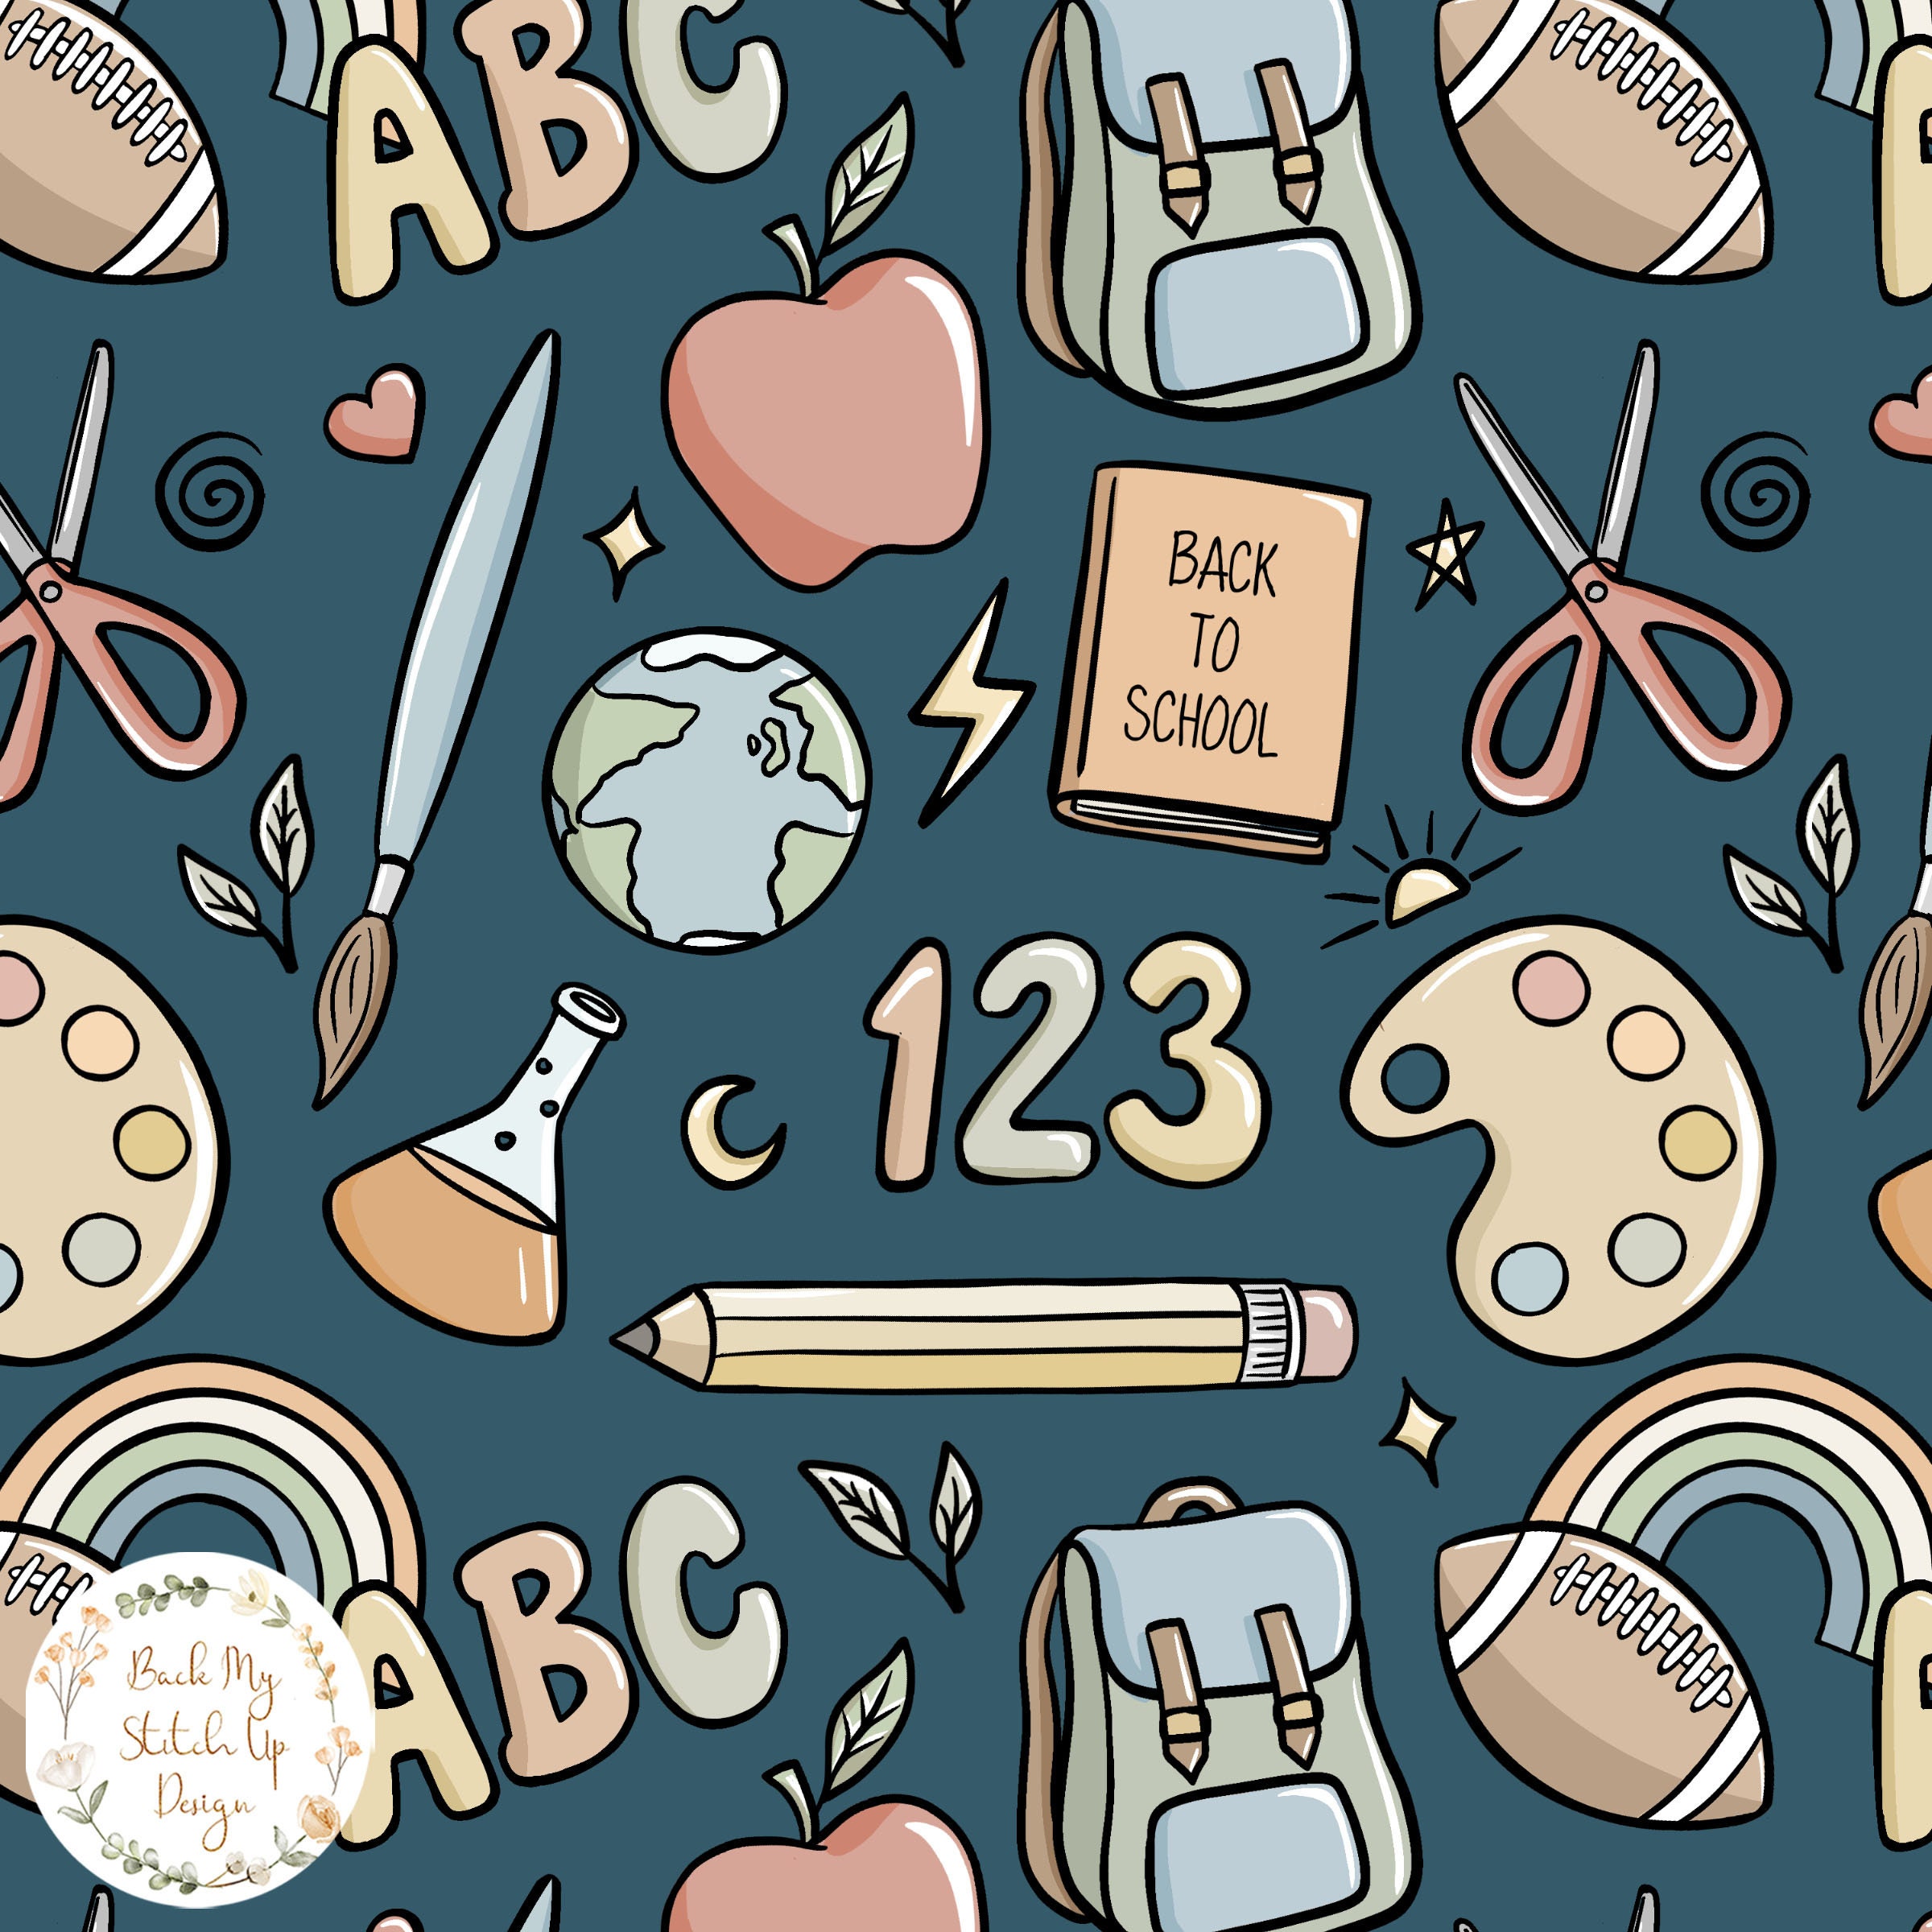 Back to School Seamless Pattern, Unisex Back to School Fabric Design,  Surface Pattern Digital Download, Commercial Licence, Crafting Paper -   Hong Kong